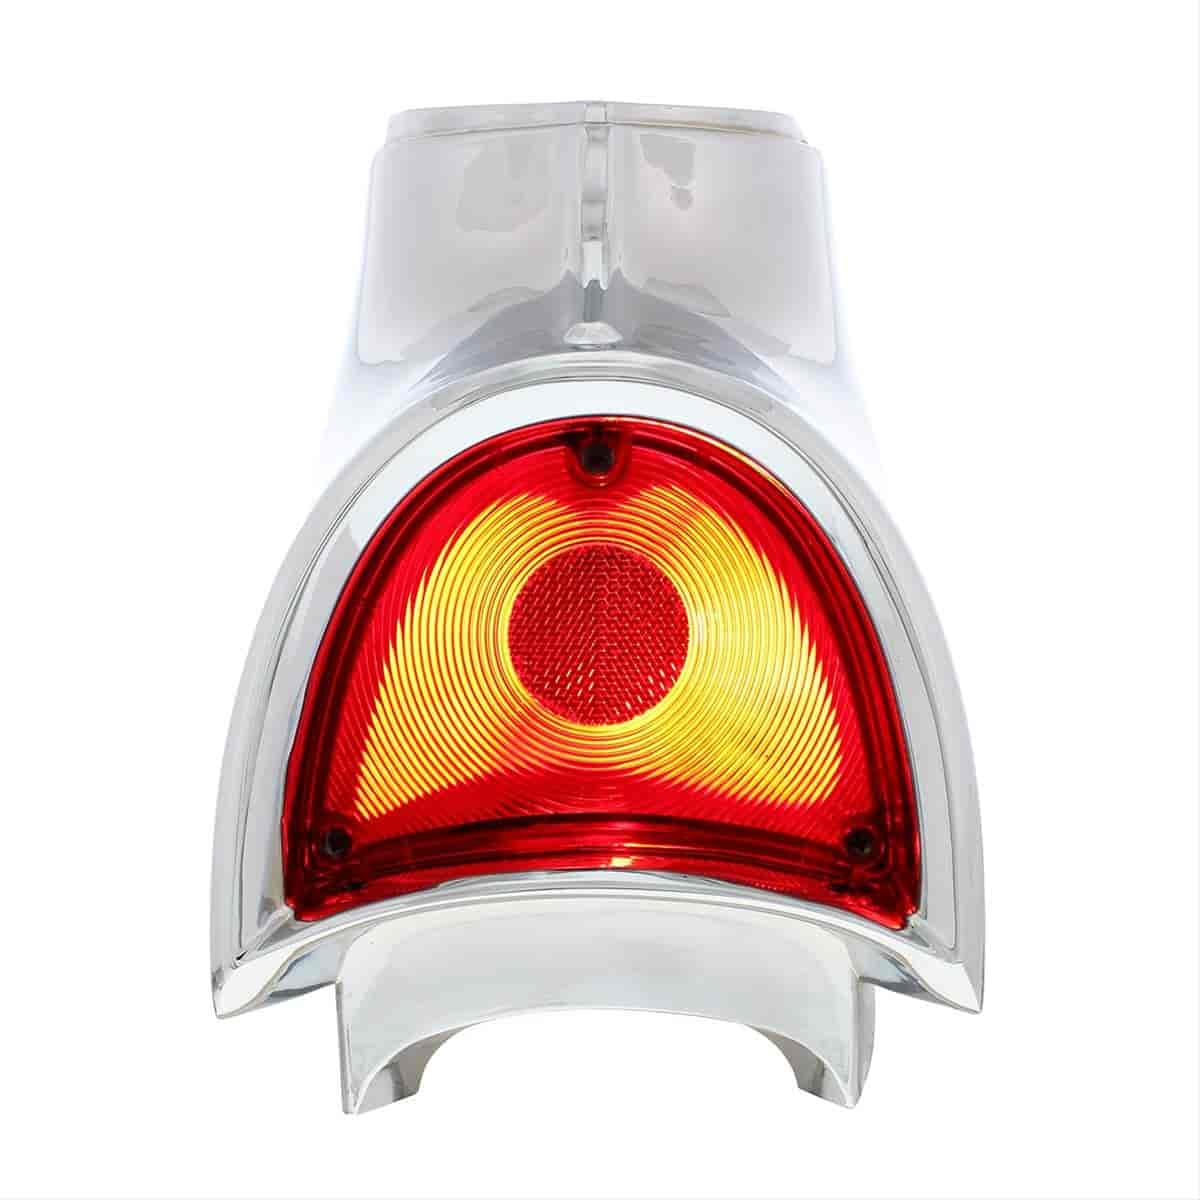 110183 Tail Light for 1957 CHEVY BEL AIR / 210 - Right/Passenger